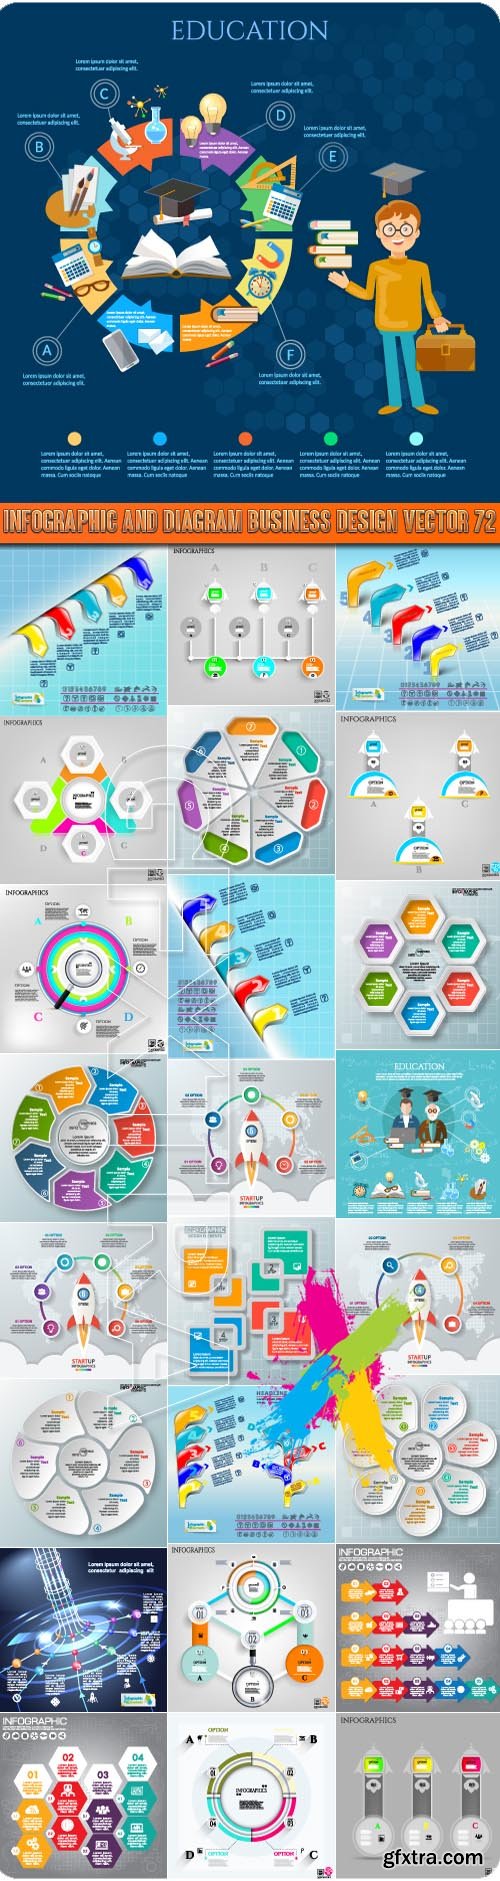 Infographic and diagram business design vector 72